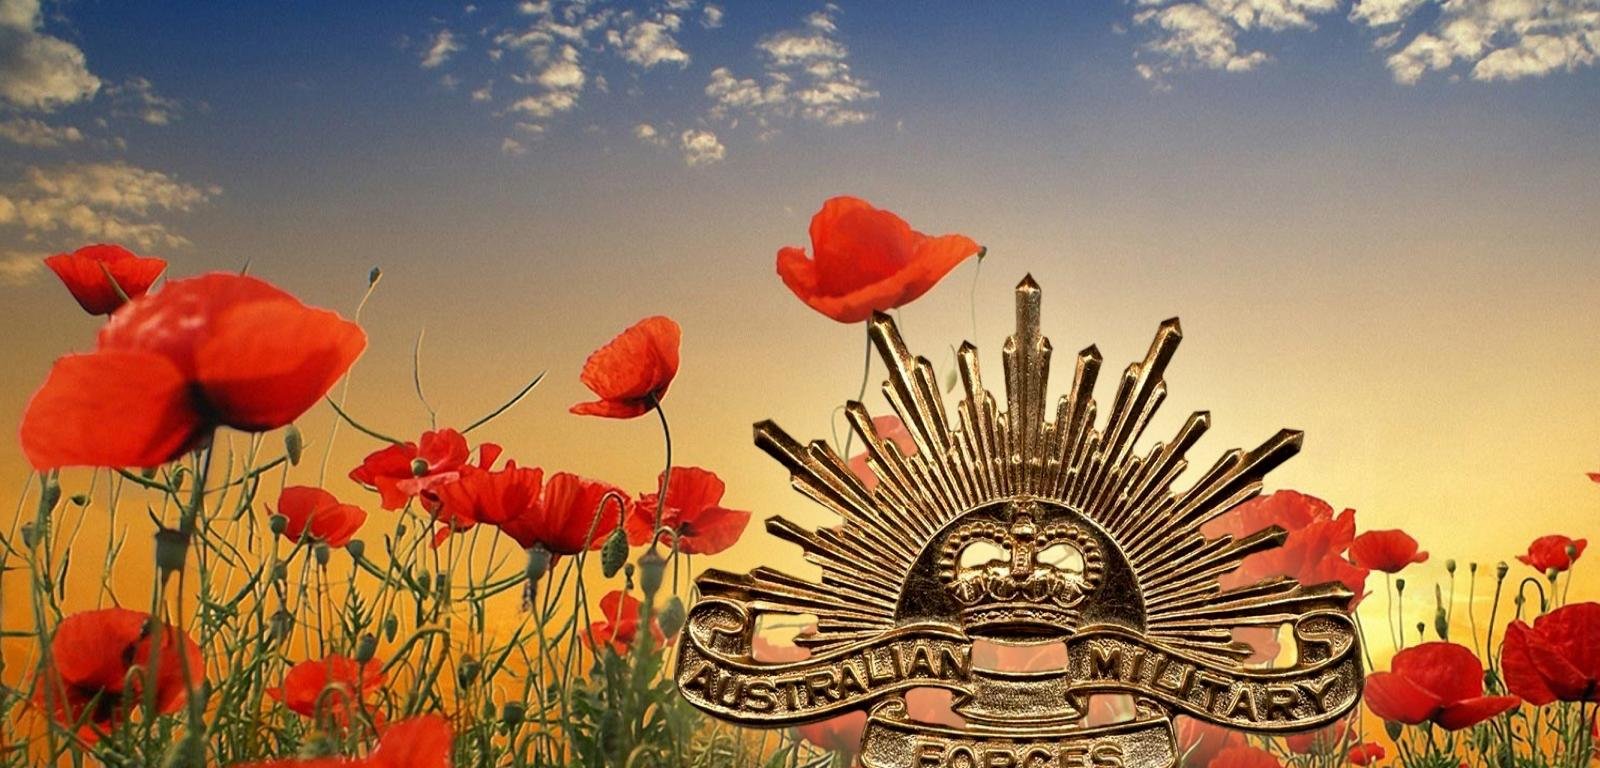 Anzac Day Wallpapers